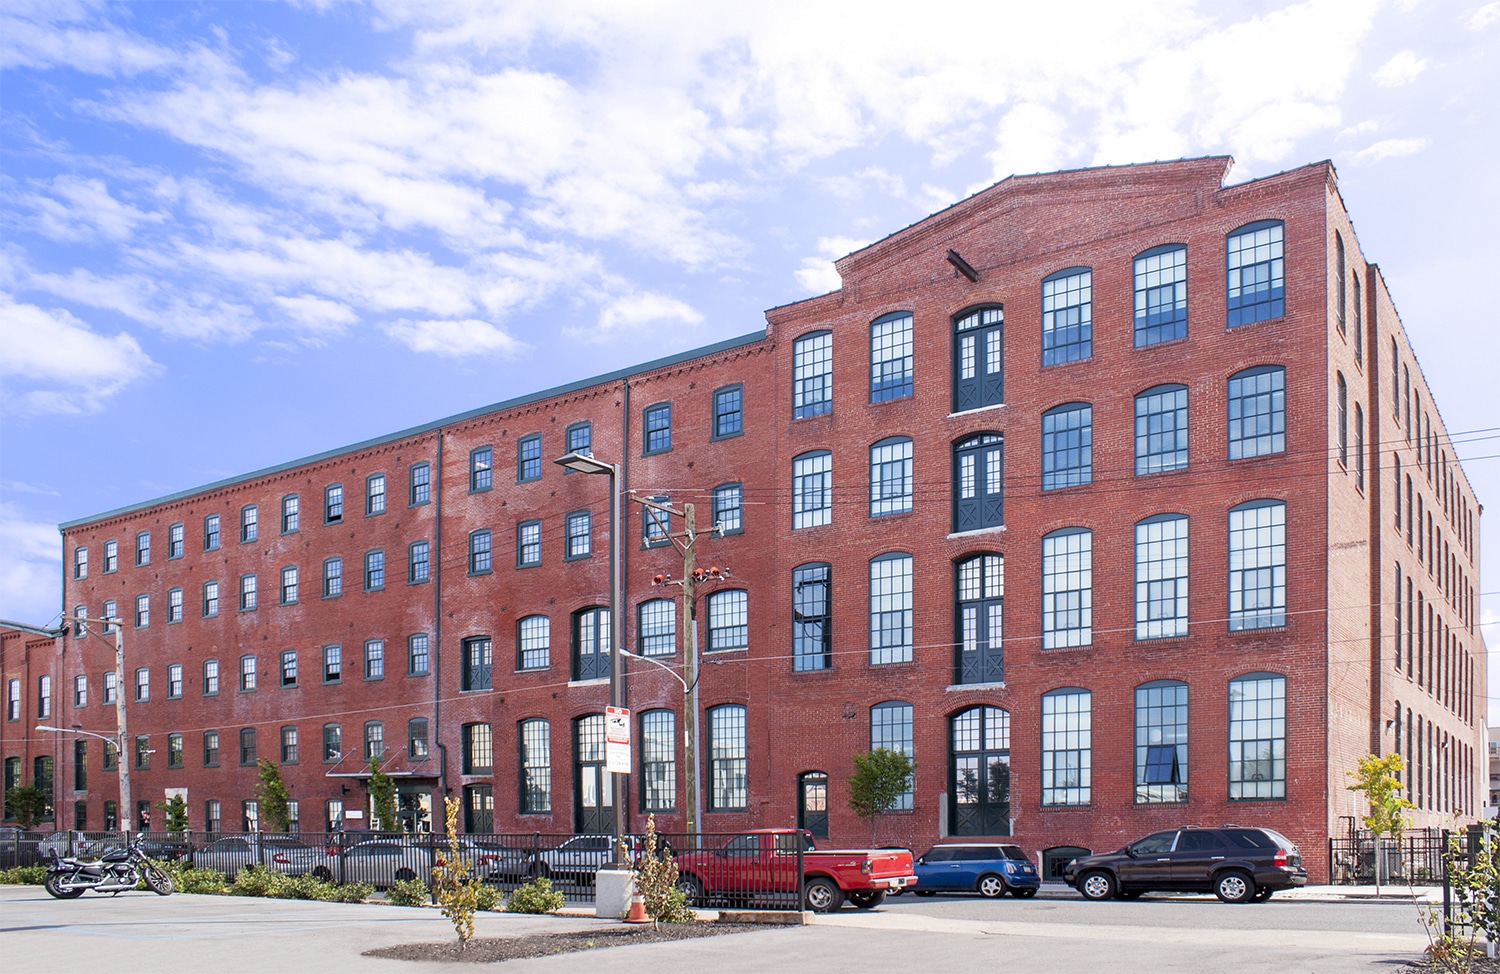 Oxford Mills wins two Best in American Living Awards